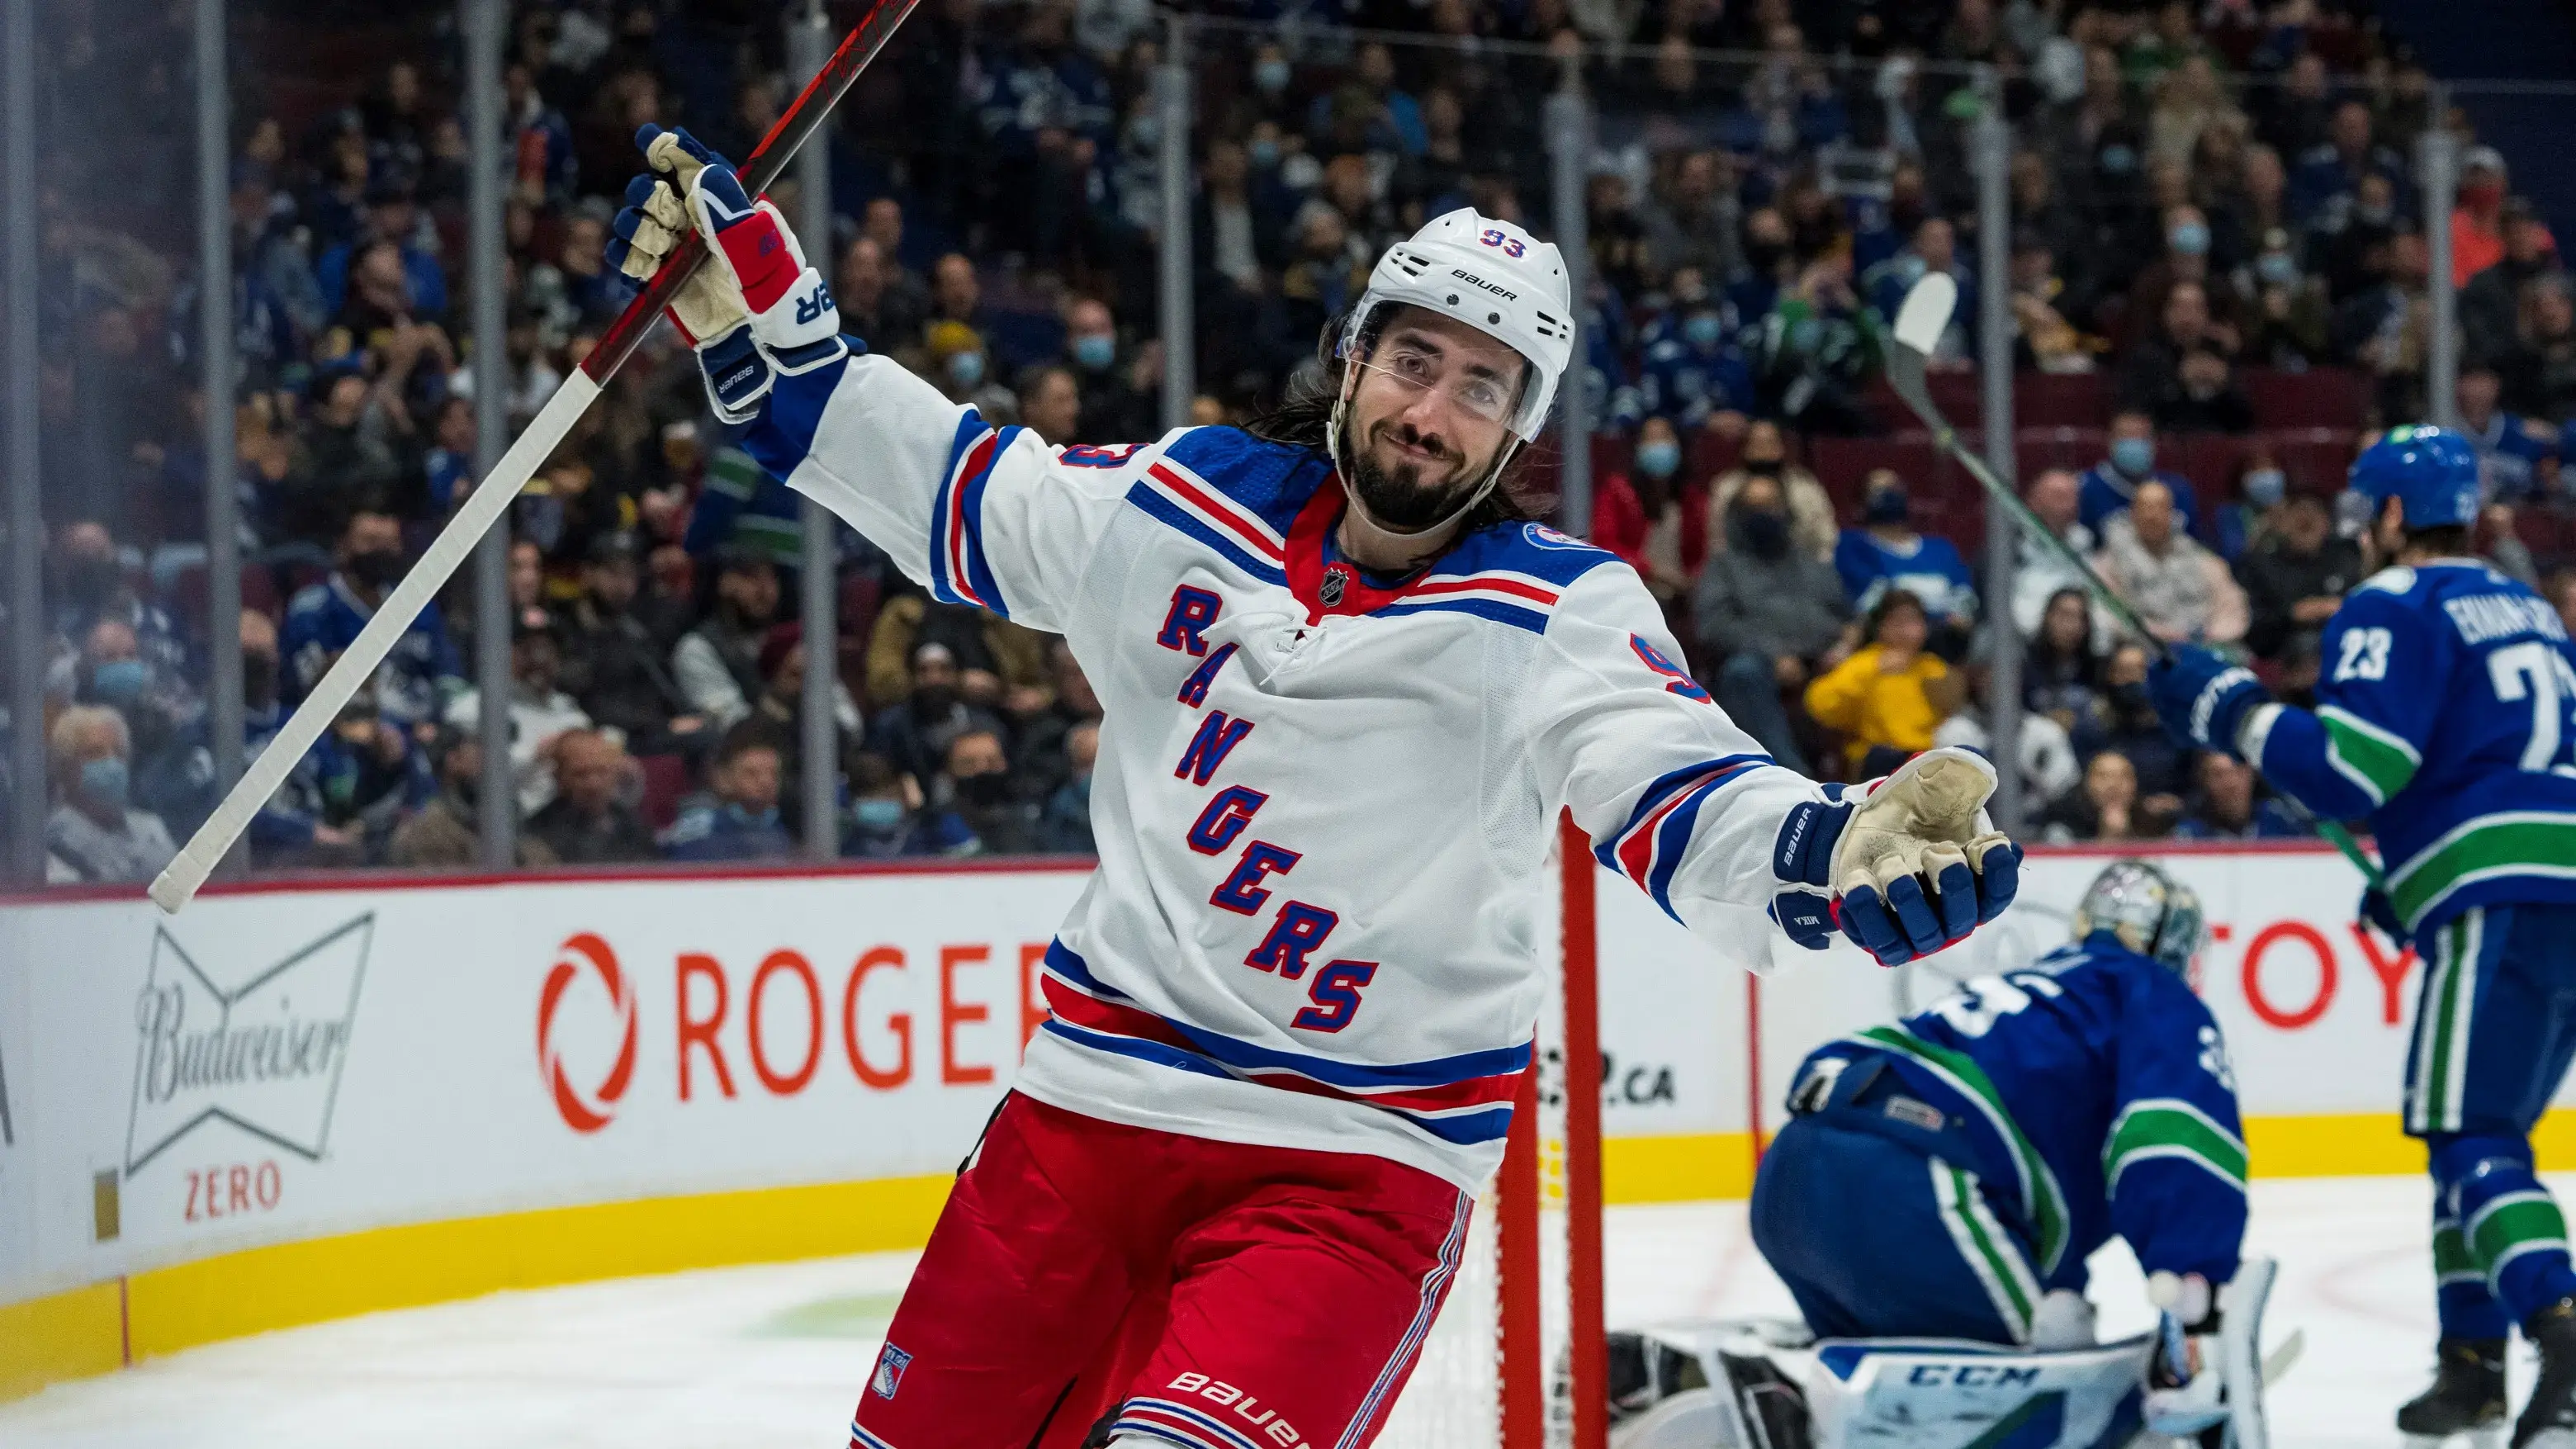 Nov 2, 2021; Vancouver, British Columbia, CAN; New York Rangers forward Mika Zibanejad (93) celebrates his goal scored on Vancouver Canucks goalie Thatcher Demko (35) in the second period at Rogers Arena. Mandatory Credit: Bob Frid-USA TODAY Sports / Bob Frid-USA TODAY Sports